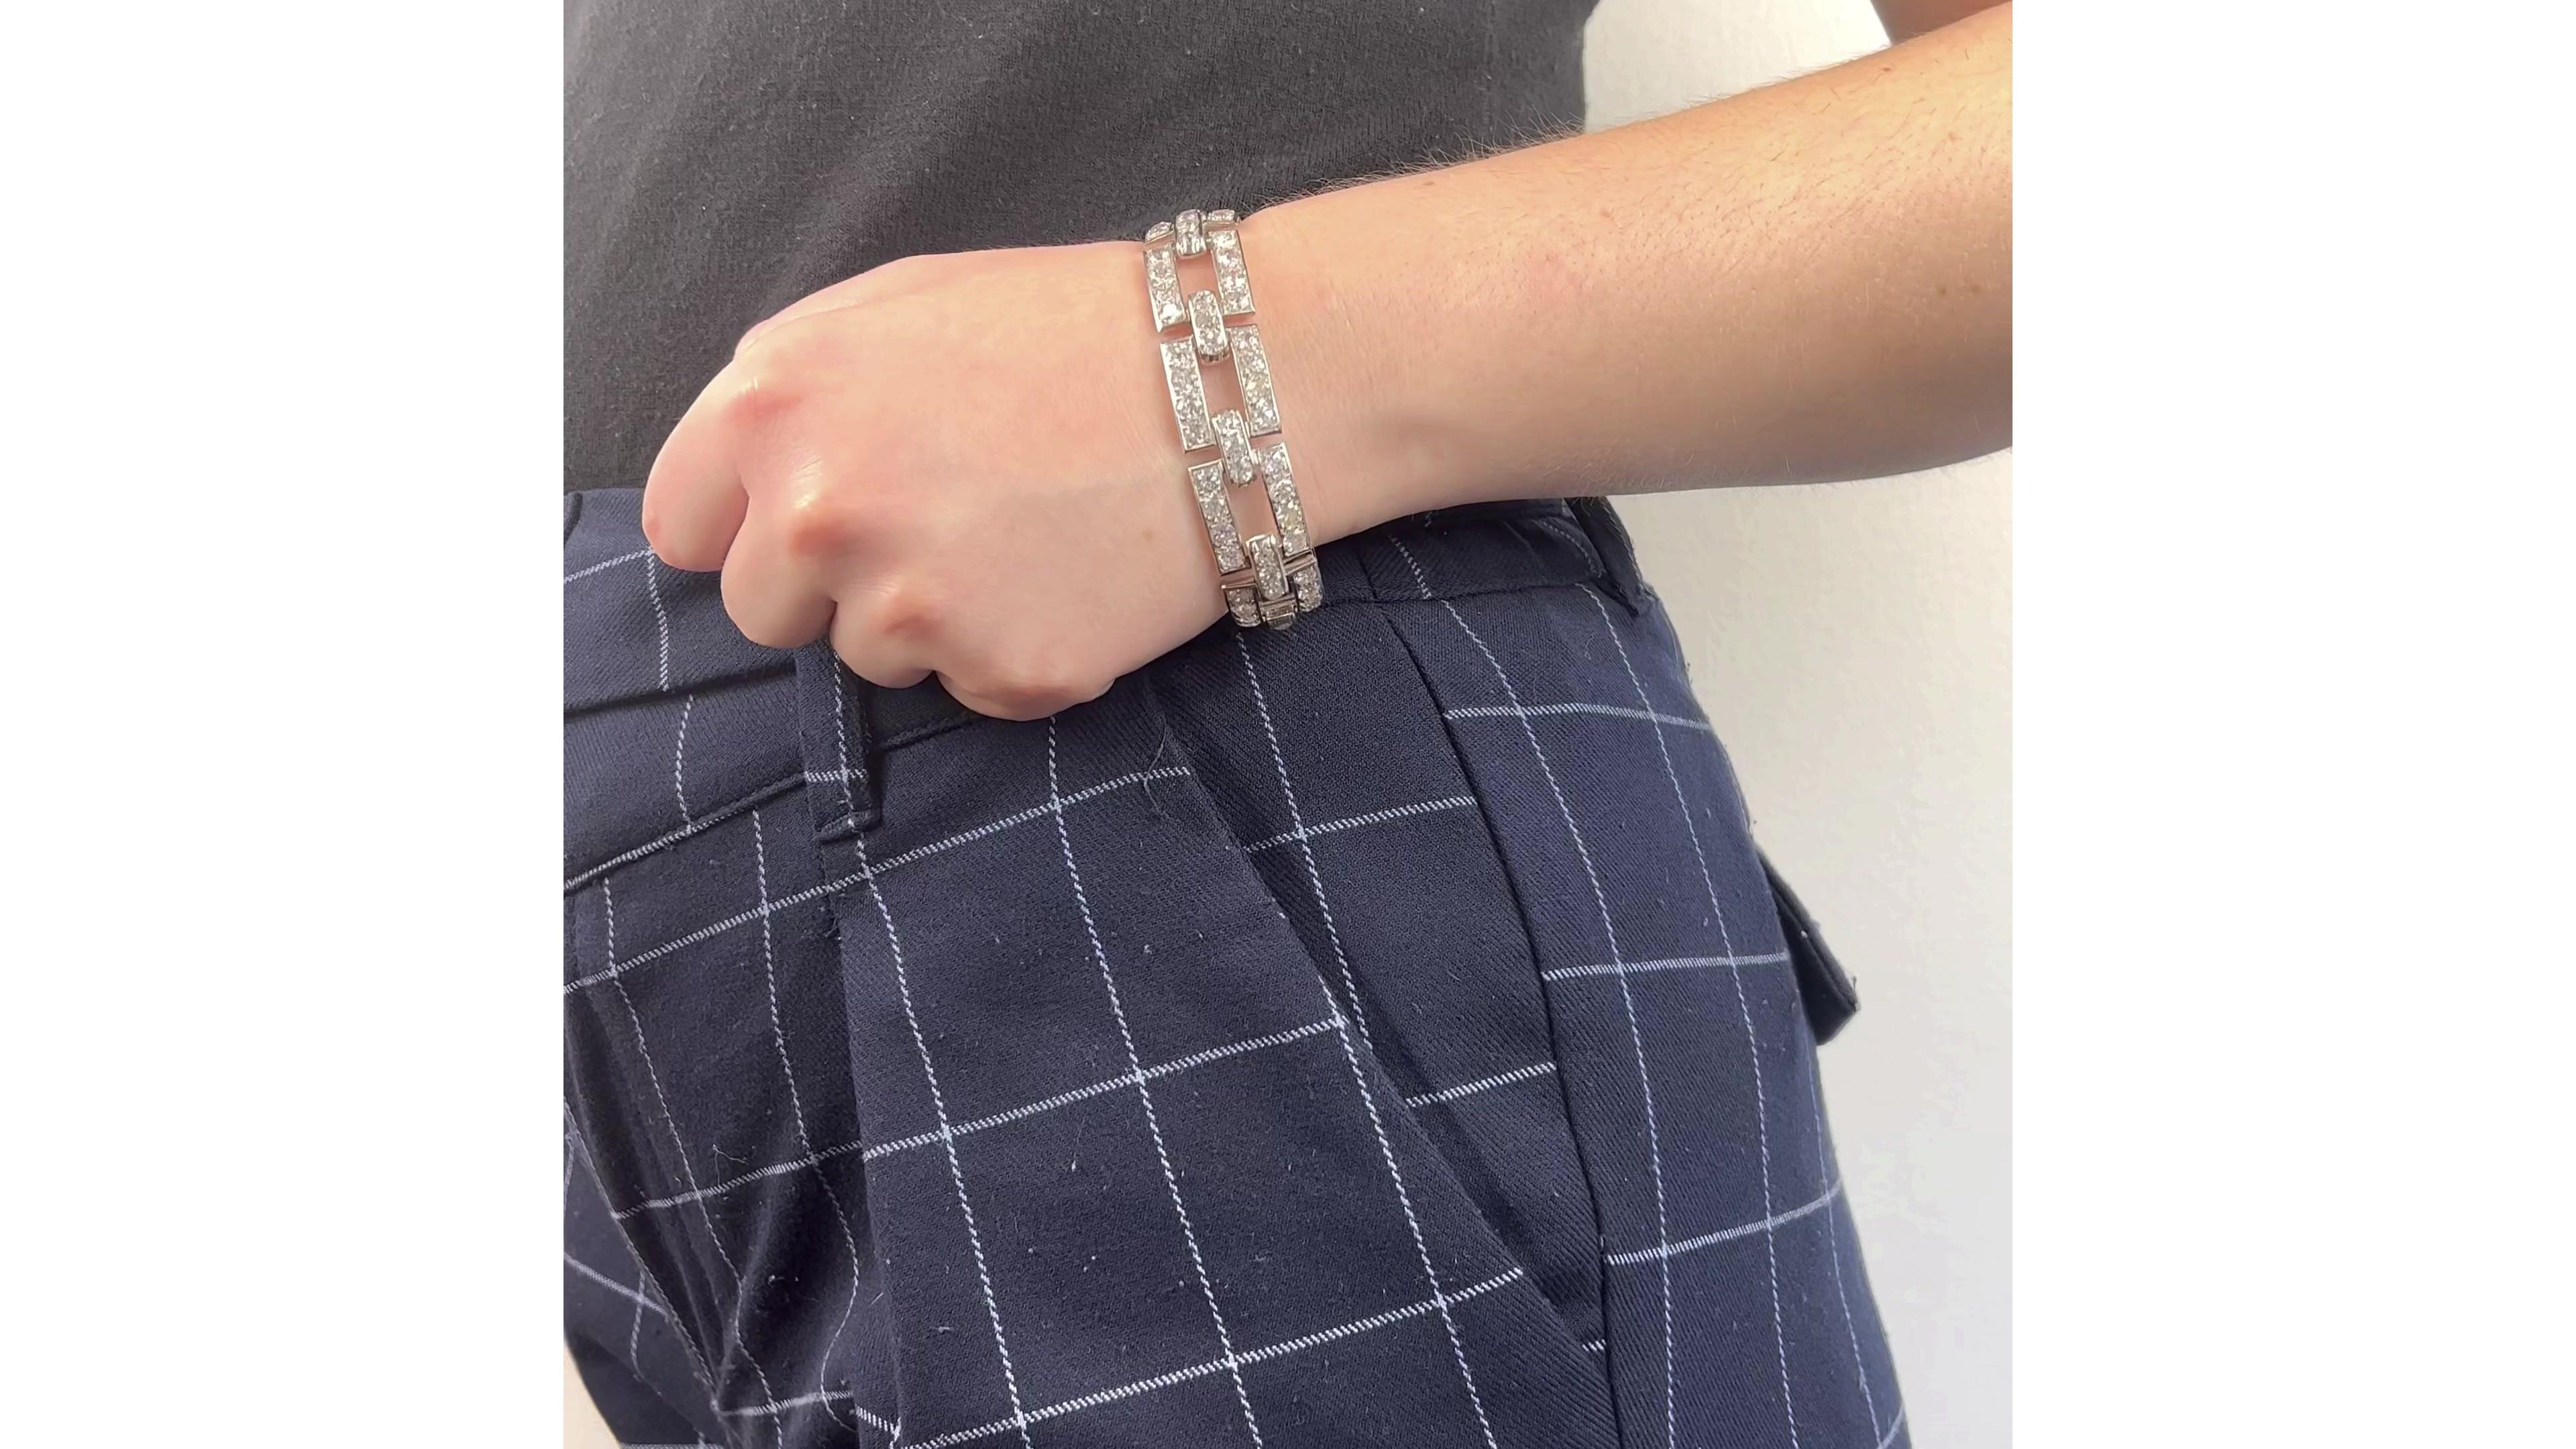 French Art Deco 26.10 Carats Old Mine Cut Diamonds Platinum Bracelet. Featuring 99 old mine cut diamonds with a total weight of approximately 26.10 carats, graded H-J average color, SI-I clarity. Crafted in platinum and 18 karat white gold with